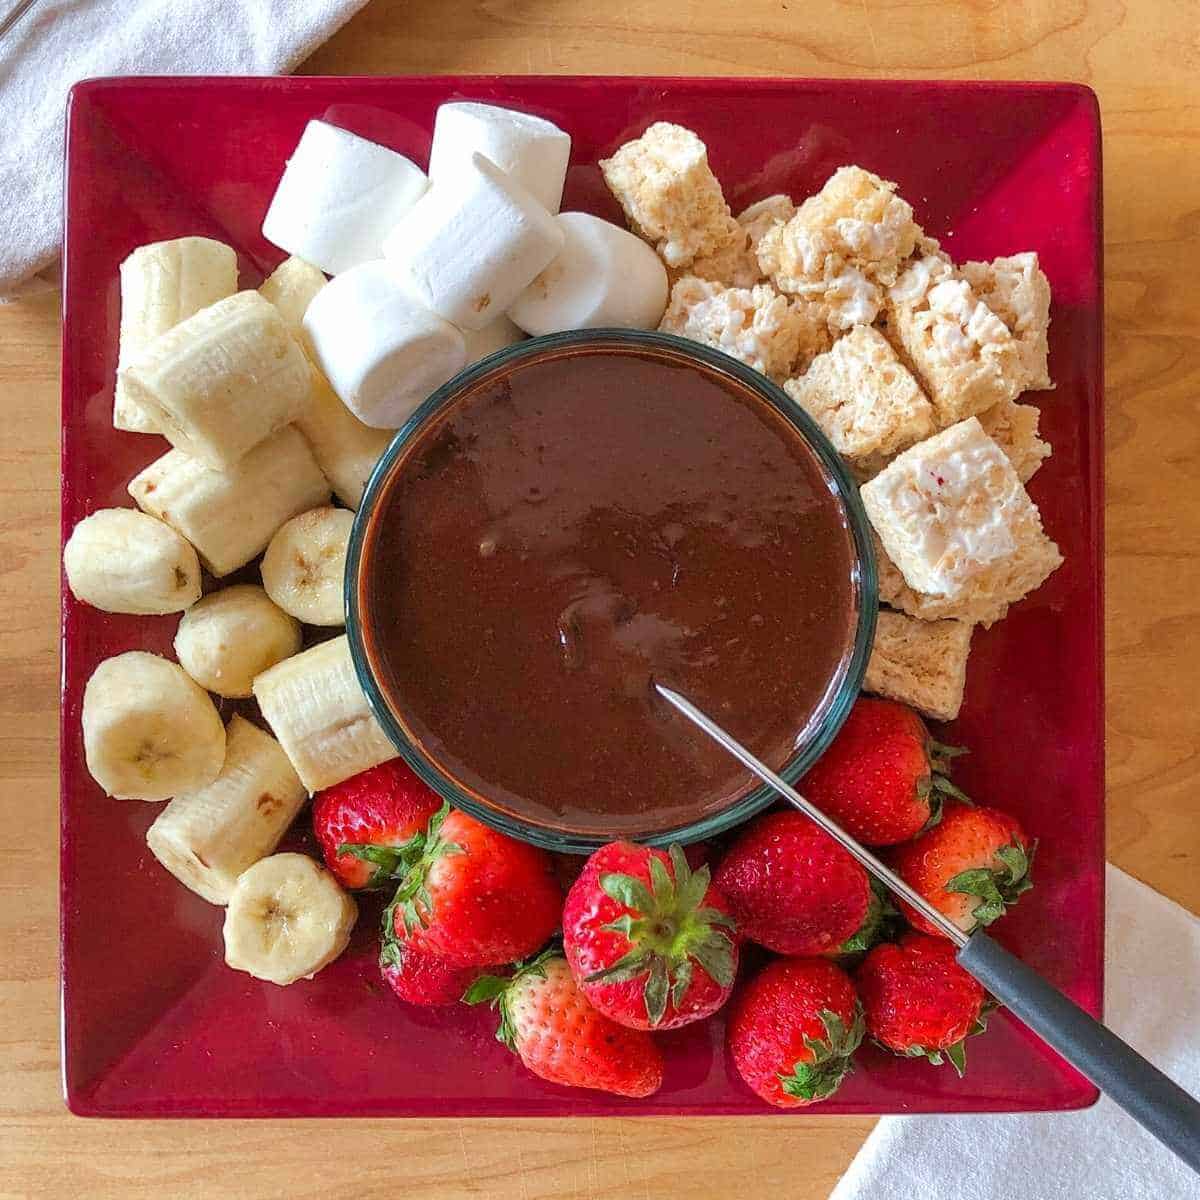 Dairy-free chocolate fondue and dippers